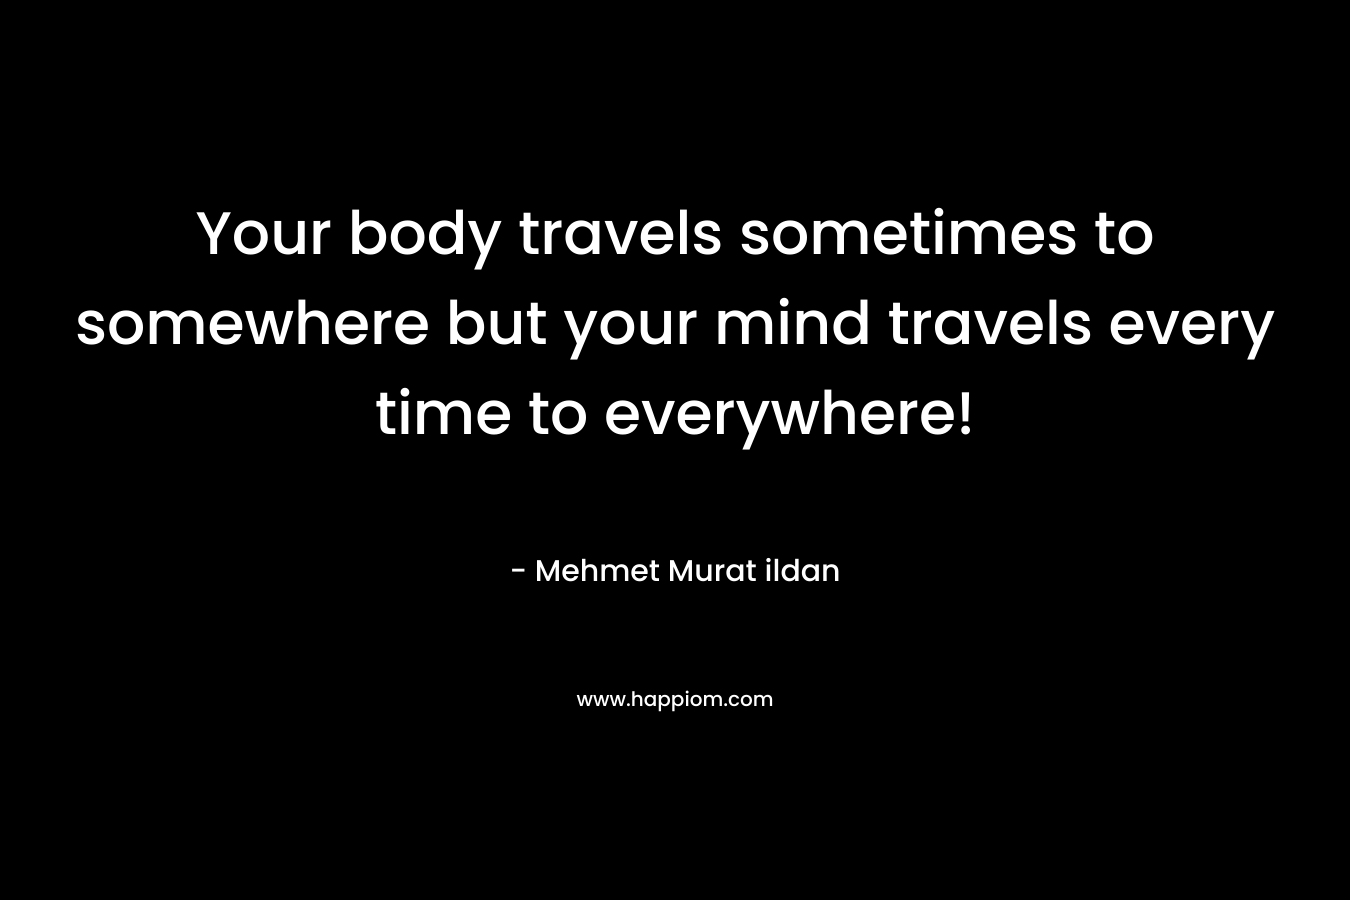 Your body travels sometimes to somewhere but your mind travels every time to everywhere!